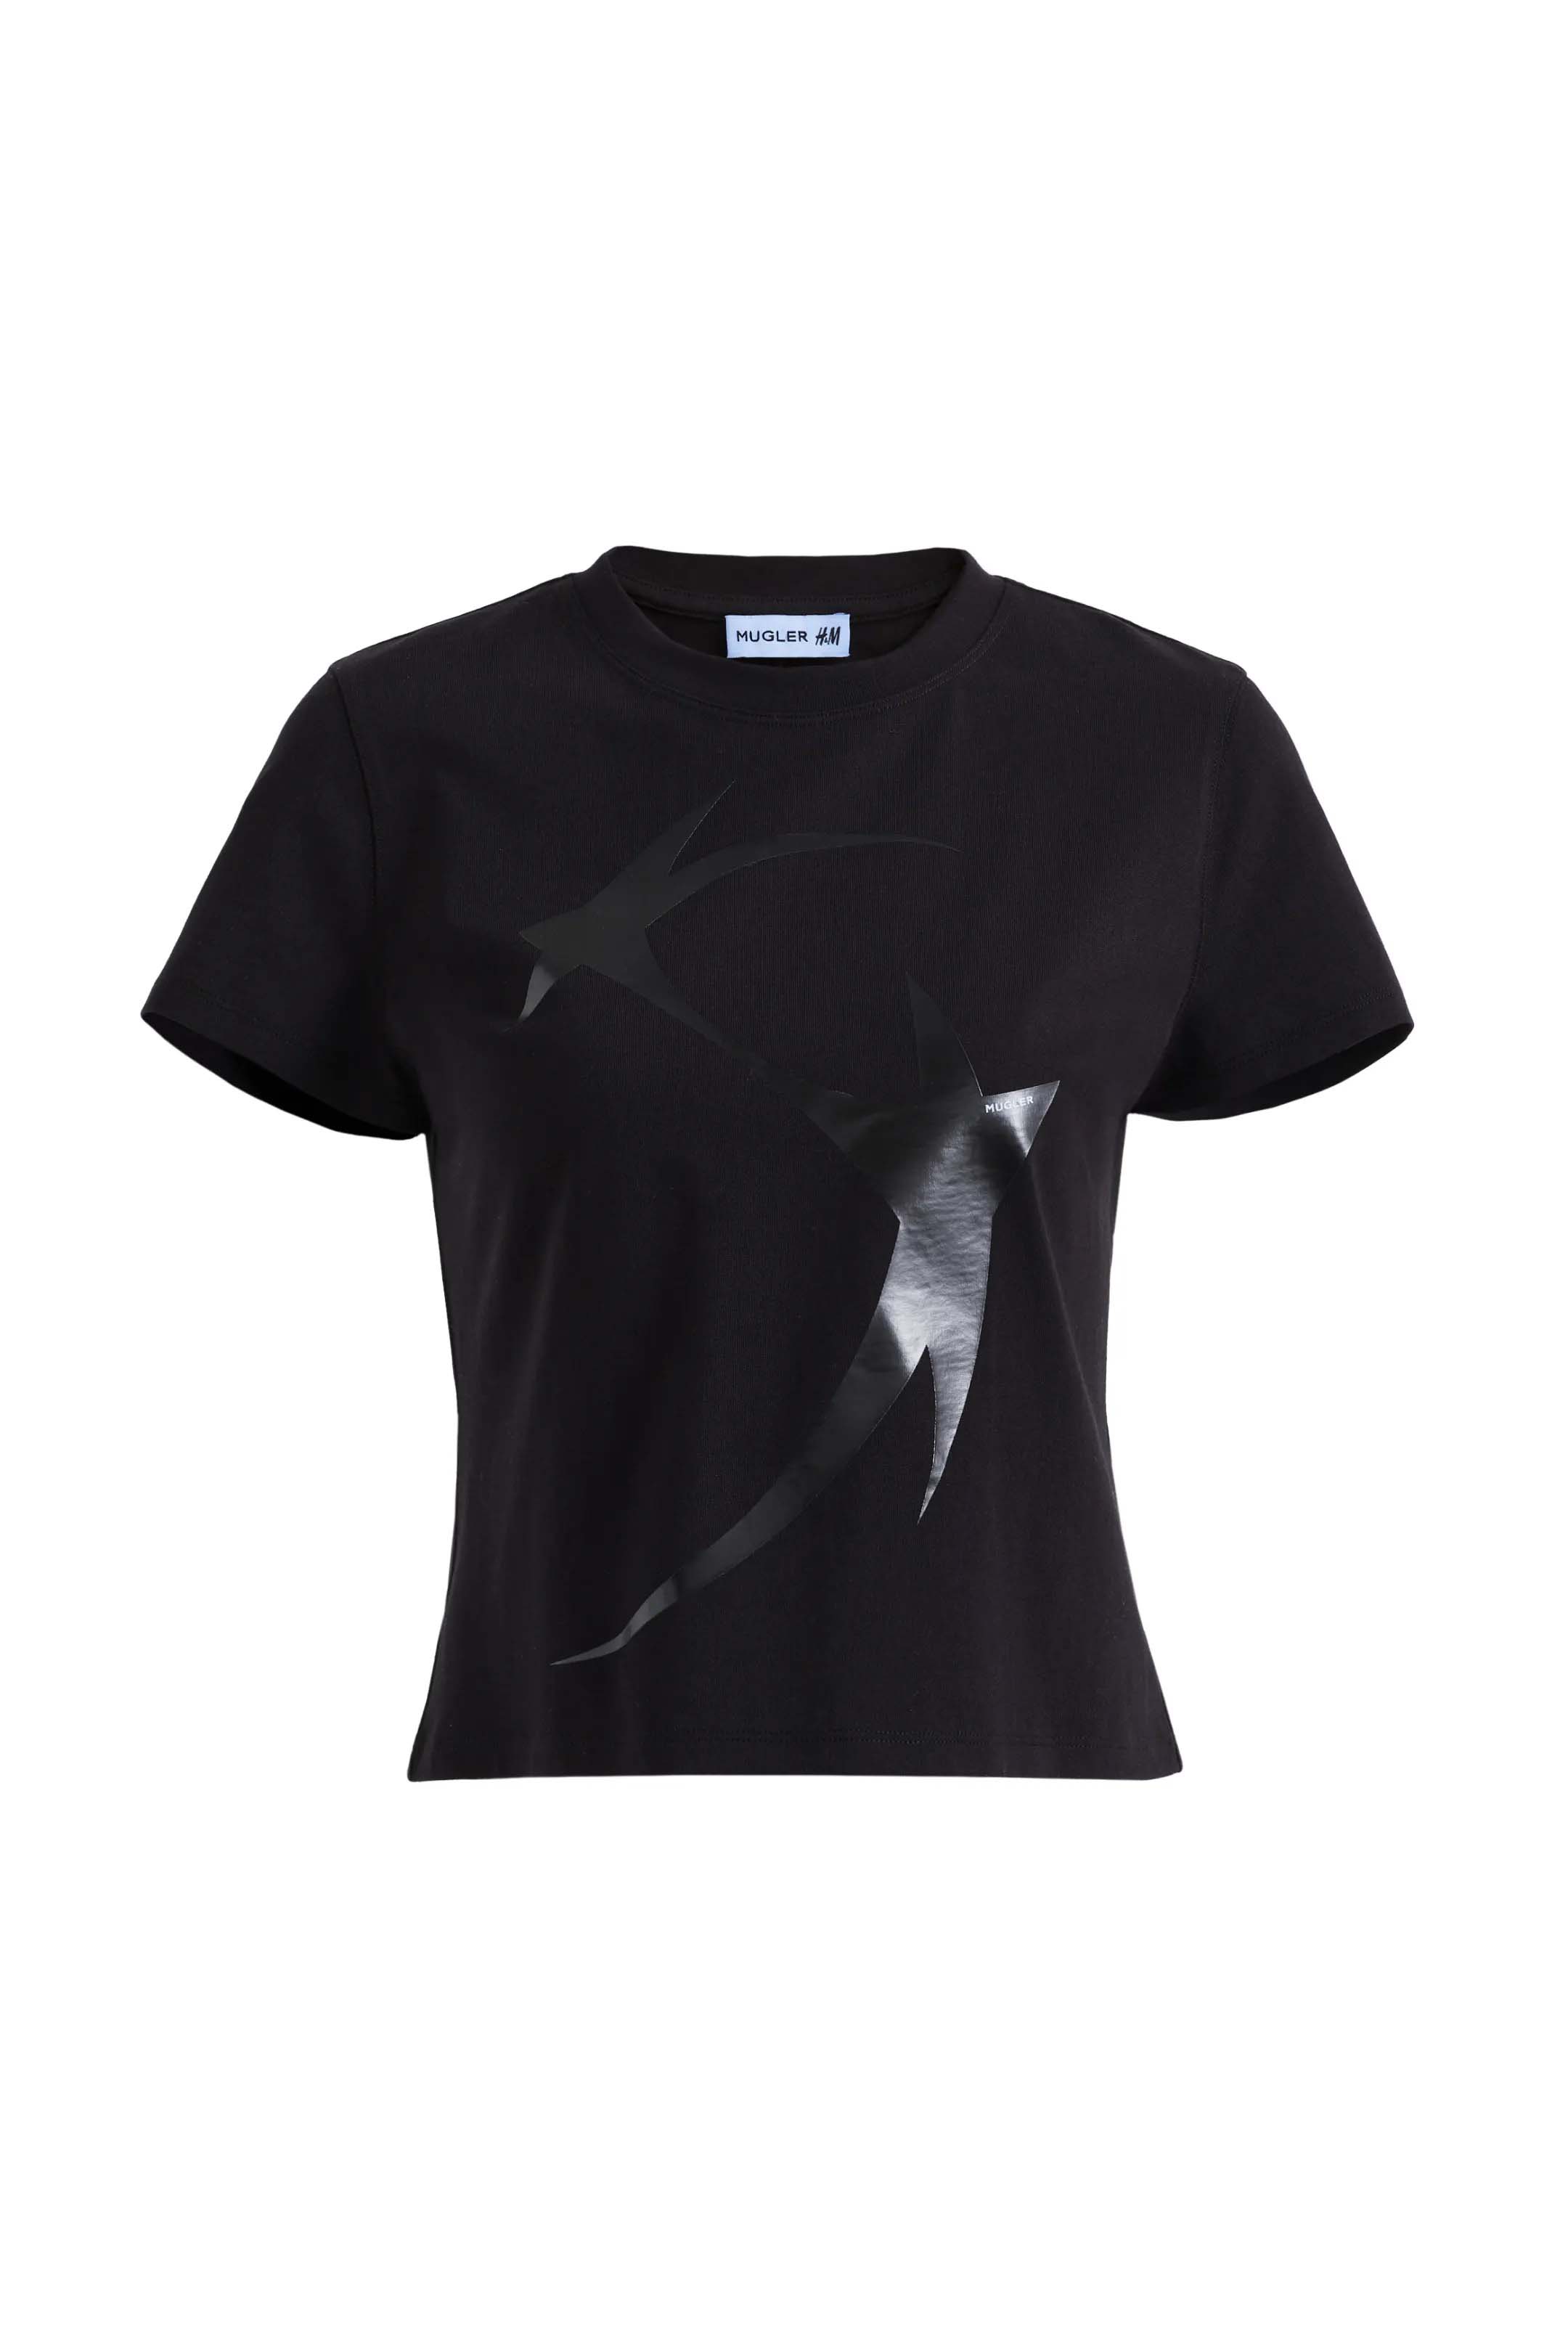 Mugler H&M Printed Fitted T-shirt Black - SS23 - US